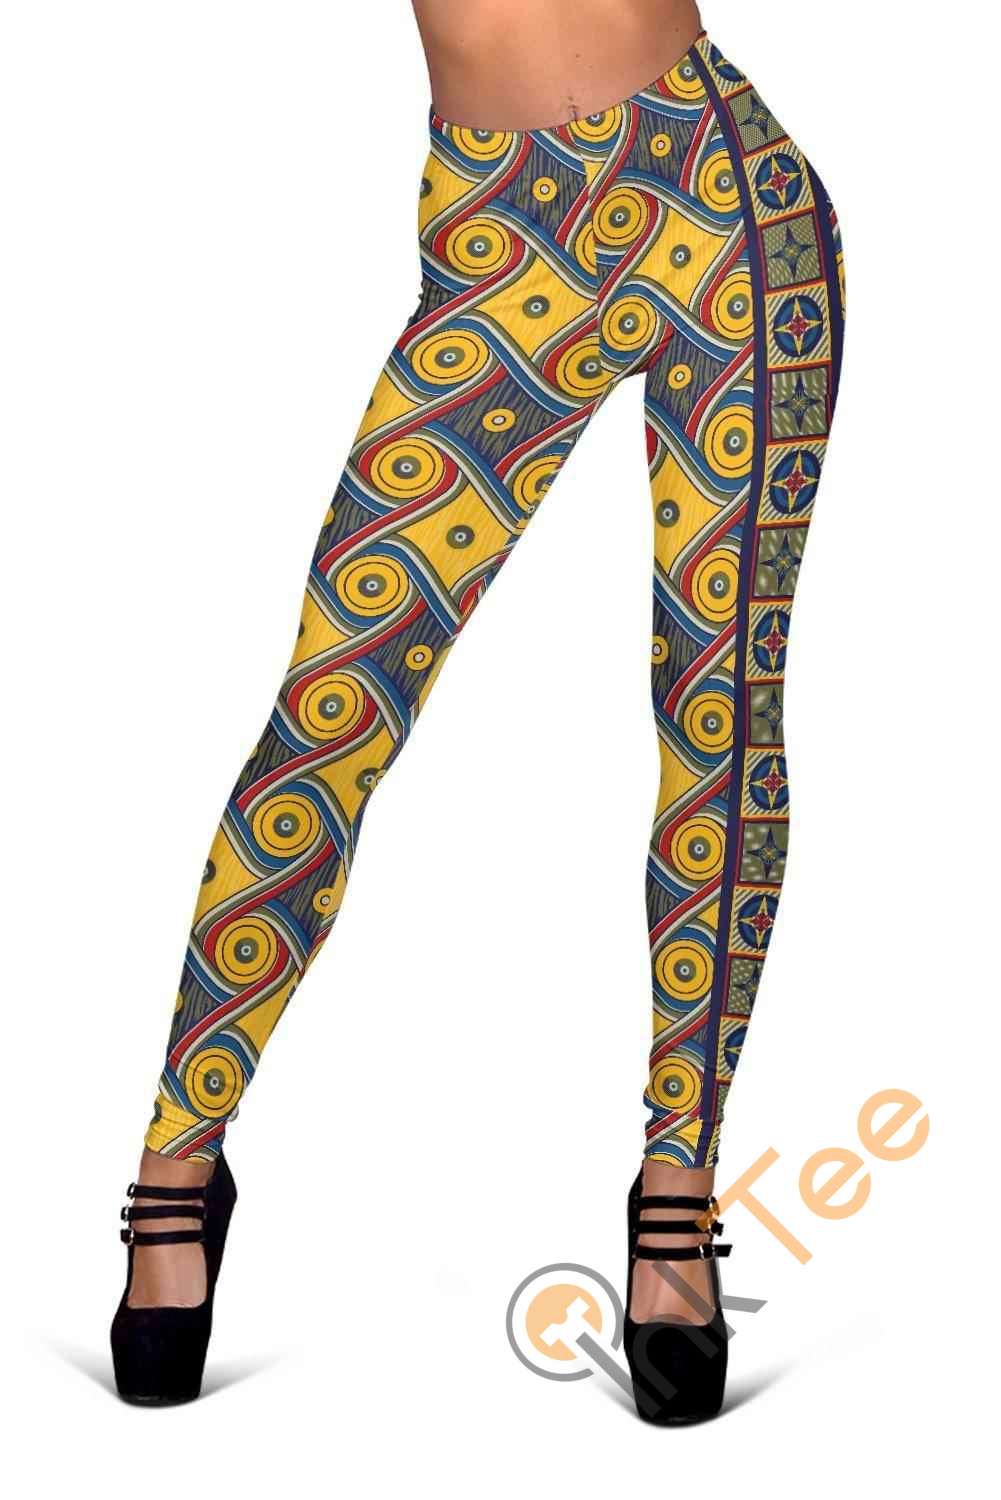 My Happy Place Gallifrey One High Waist Fashion Yoga Fitness 3D All Over Print For Yoga Fitness Legging